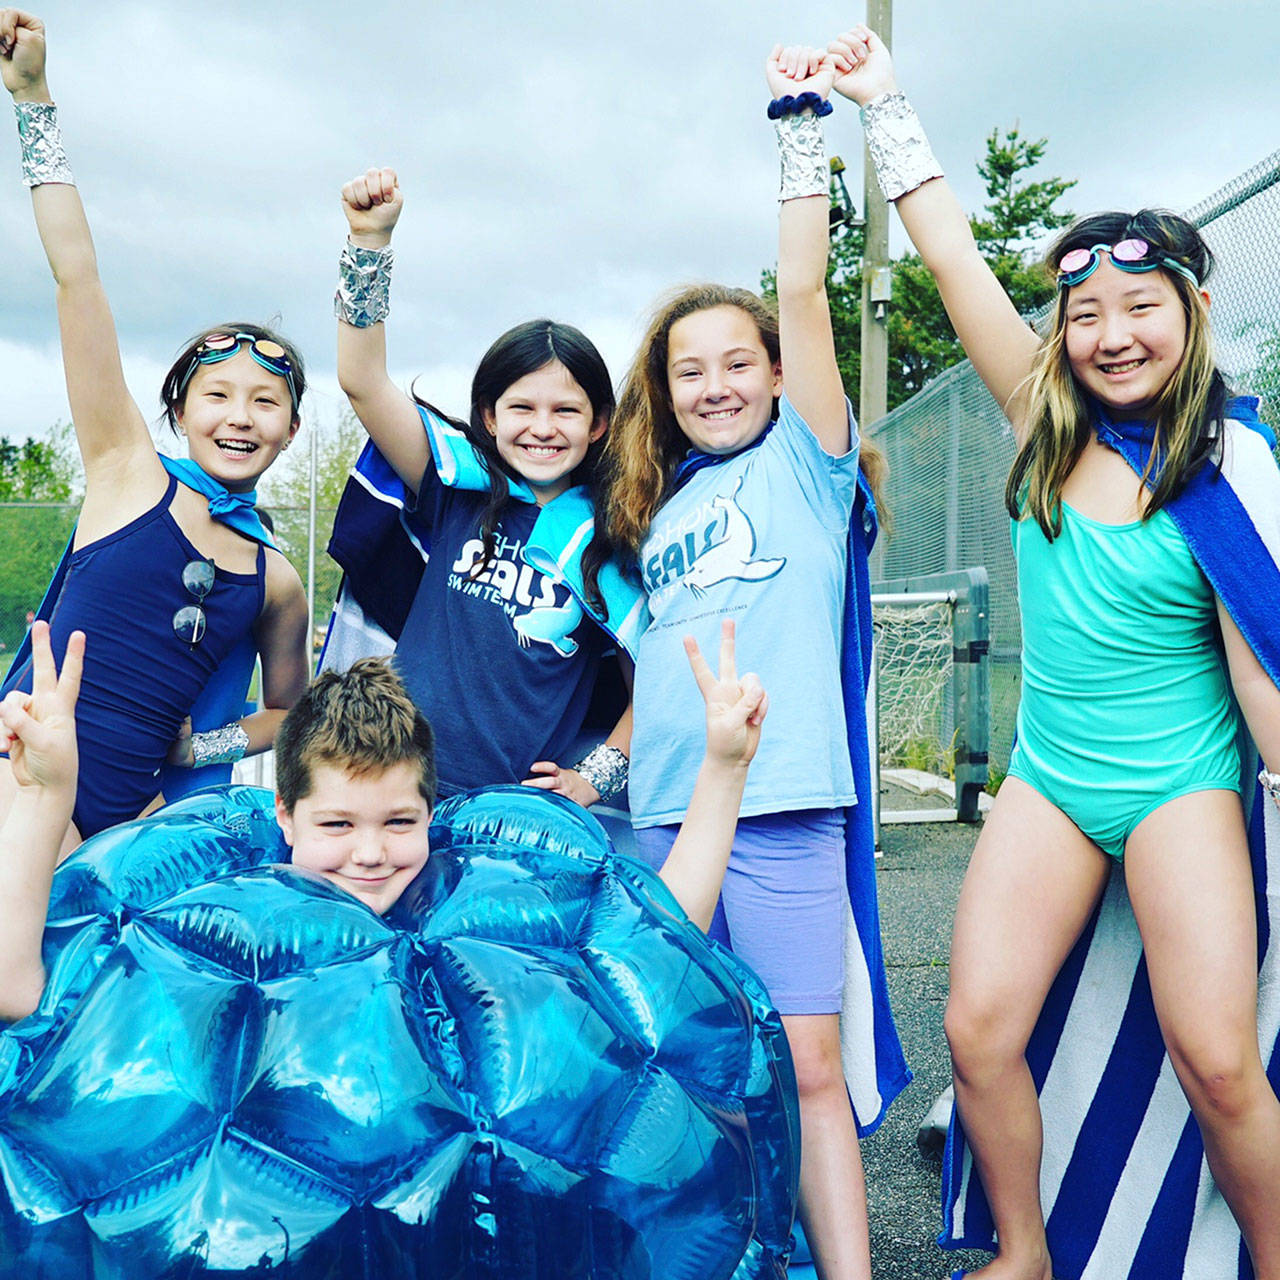 Captain Chlorine and the Swim Squad are running for unofficial mayor to help the Seals swim team raise money to cover the Vashon Pool. (Courtesy Photo)